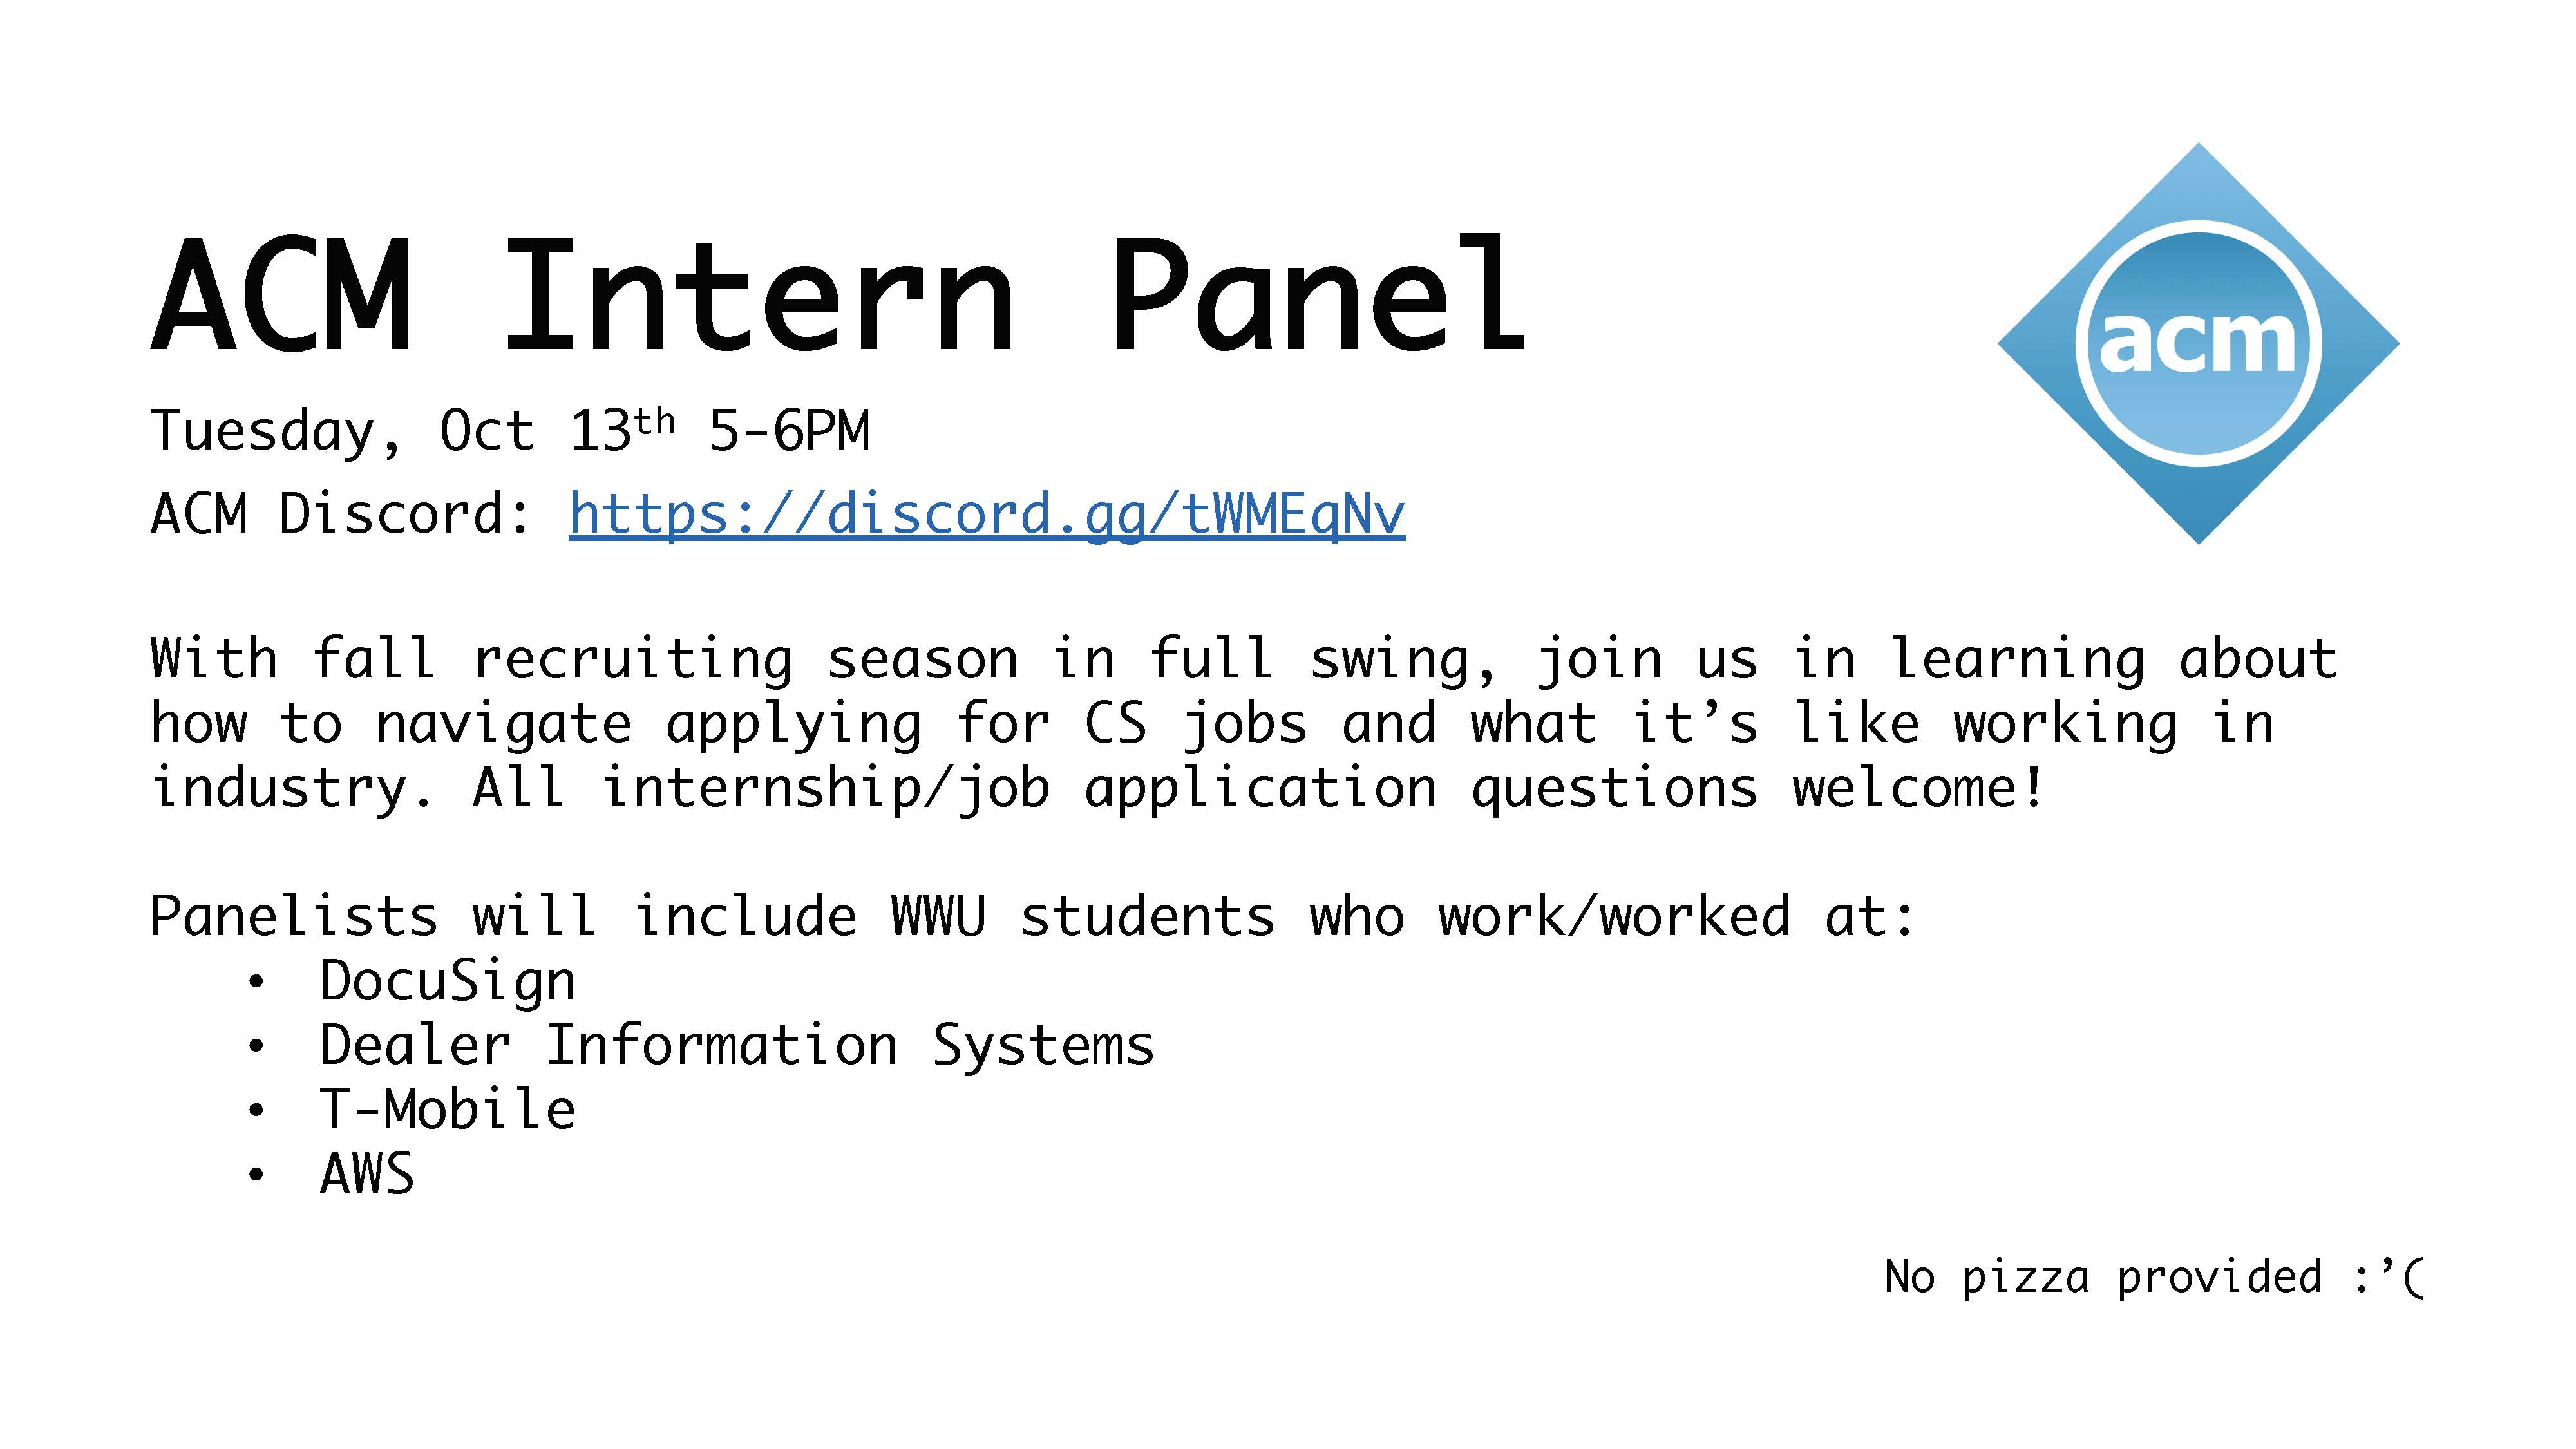 Poster for ACM Intern Panel